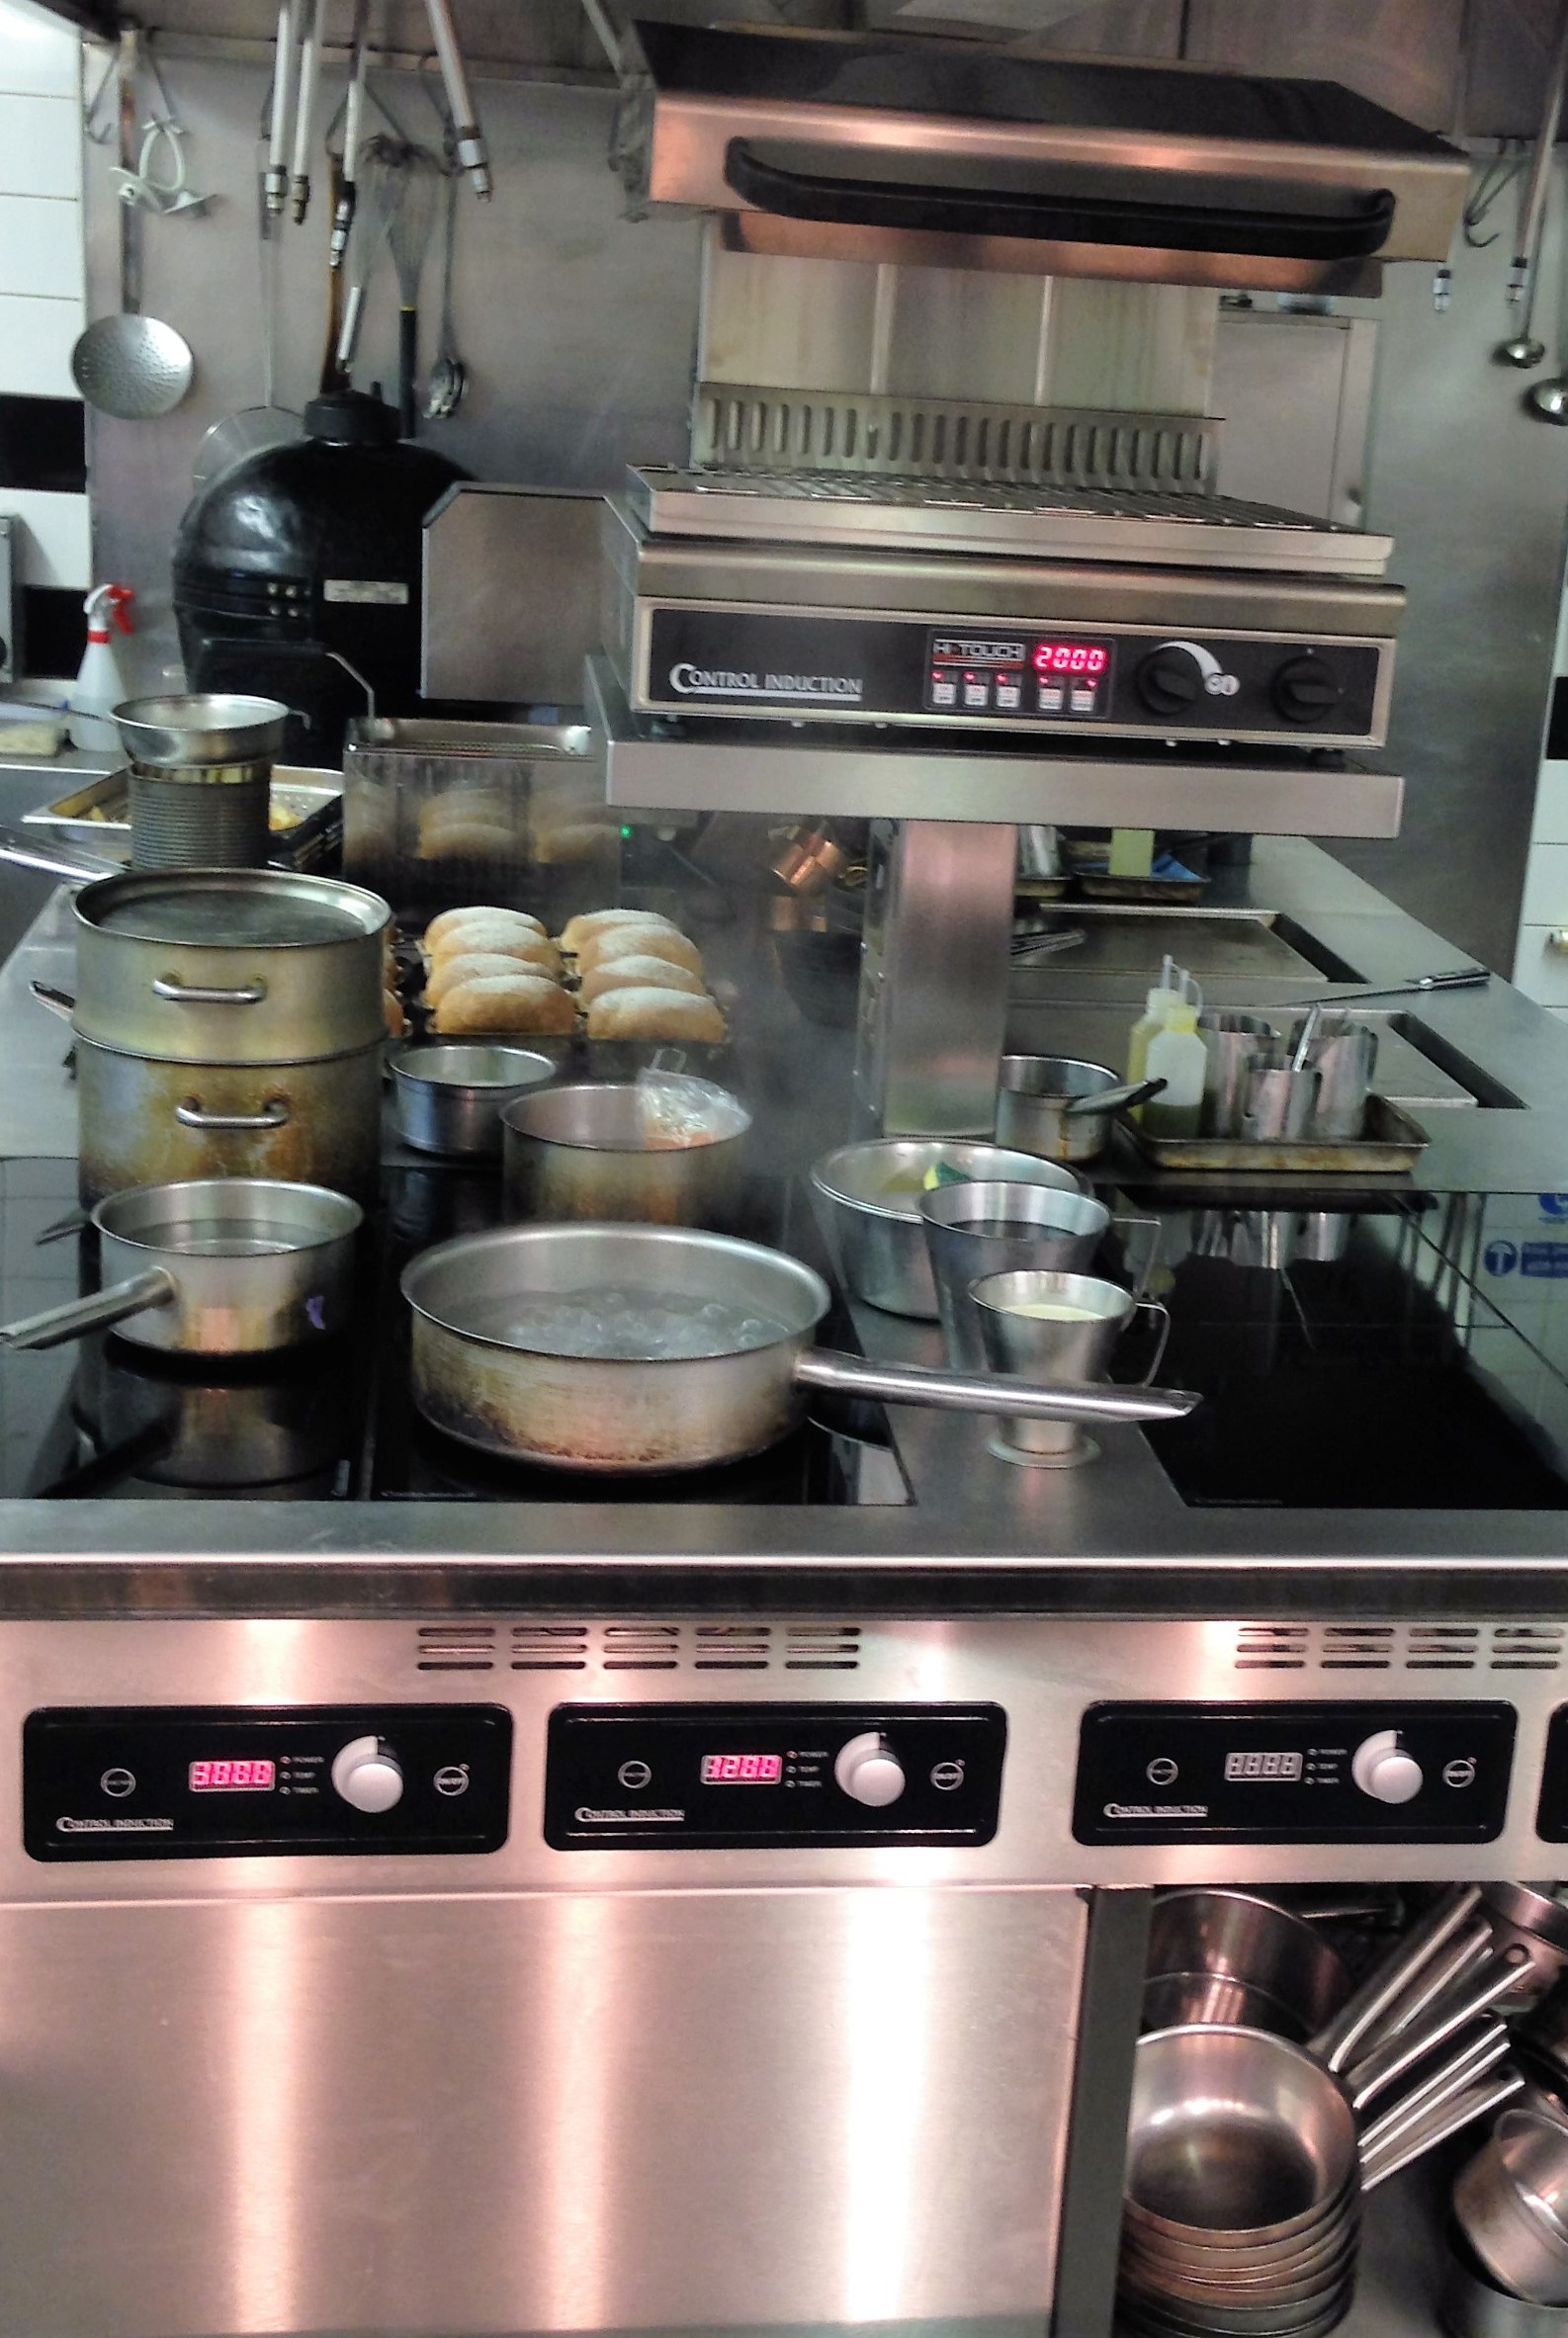 Busy induction stove